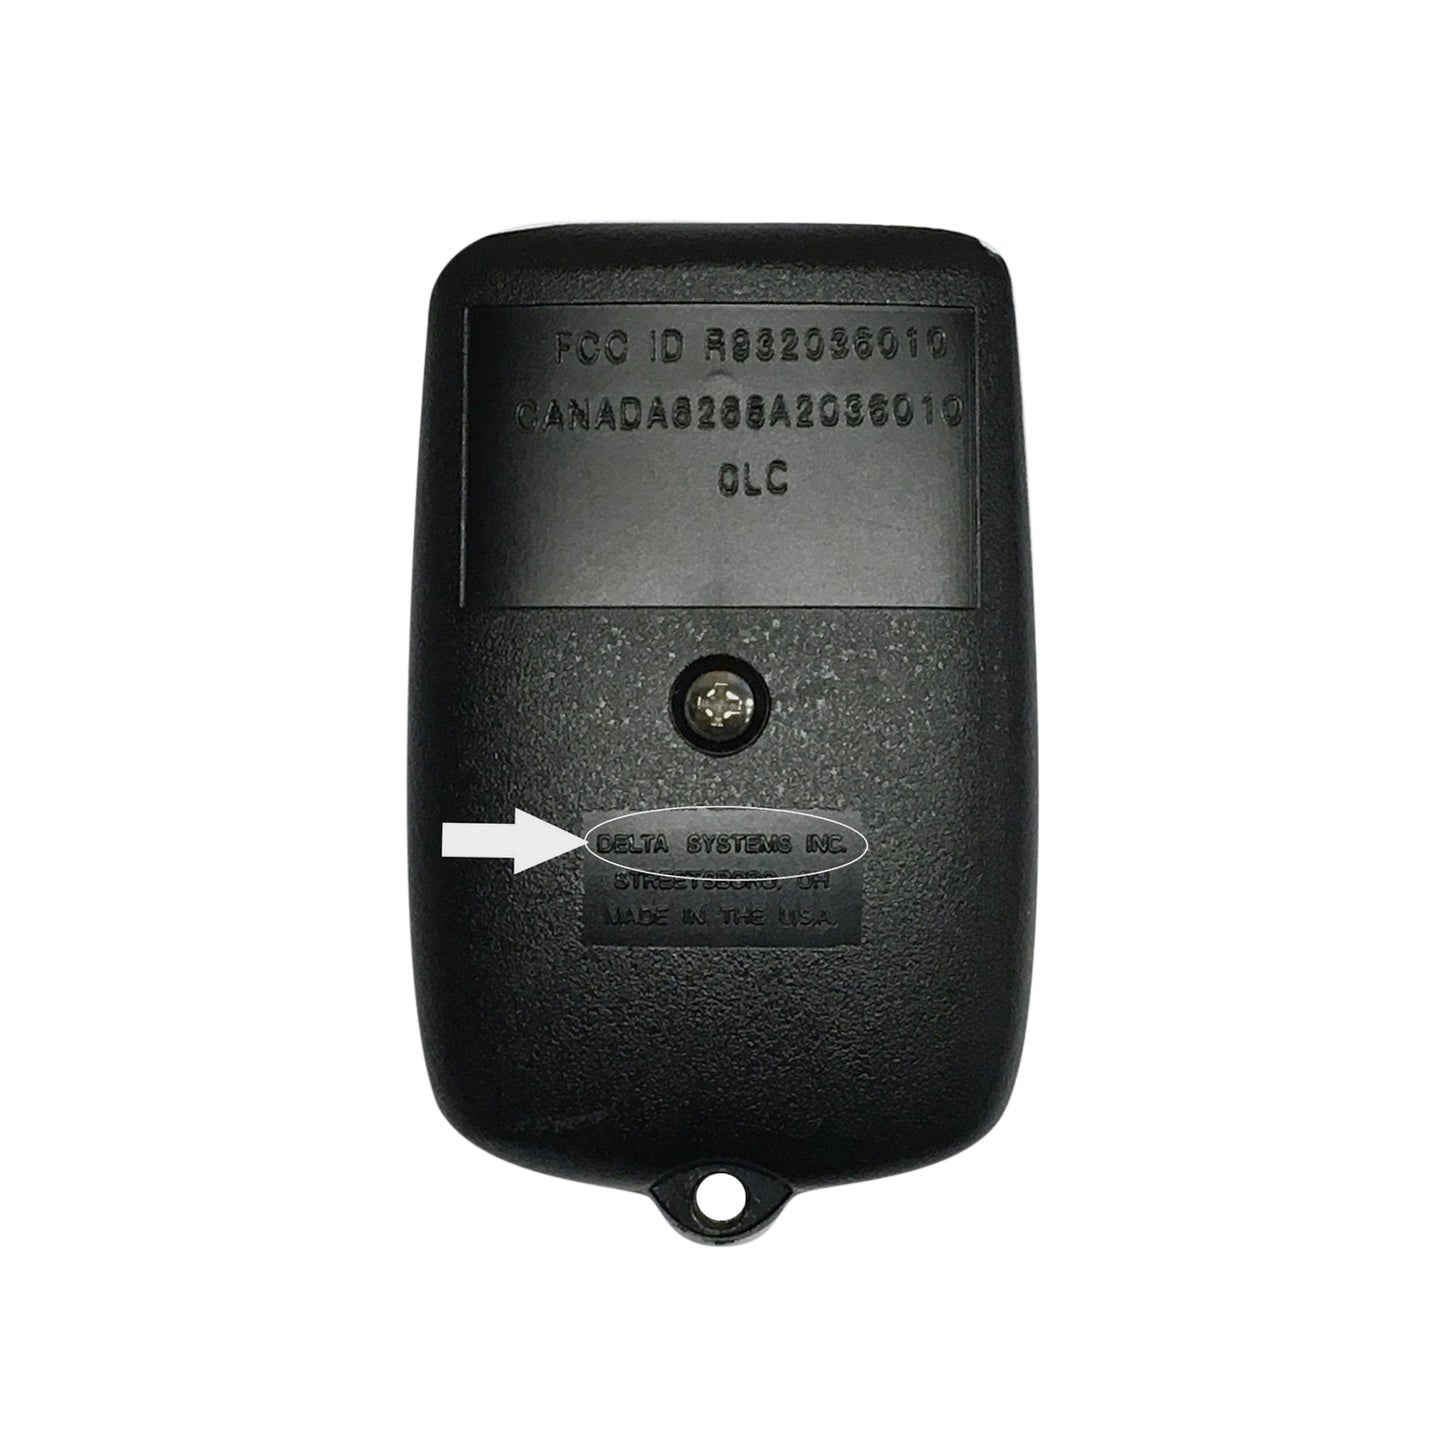 WS9955029, Panther Wireless Receiver for older "Delta Systems" models